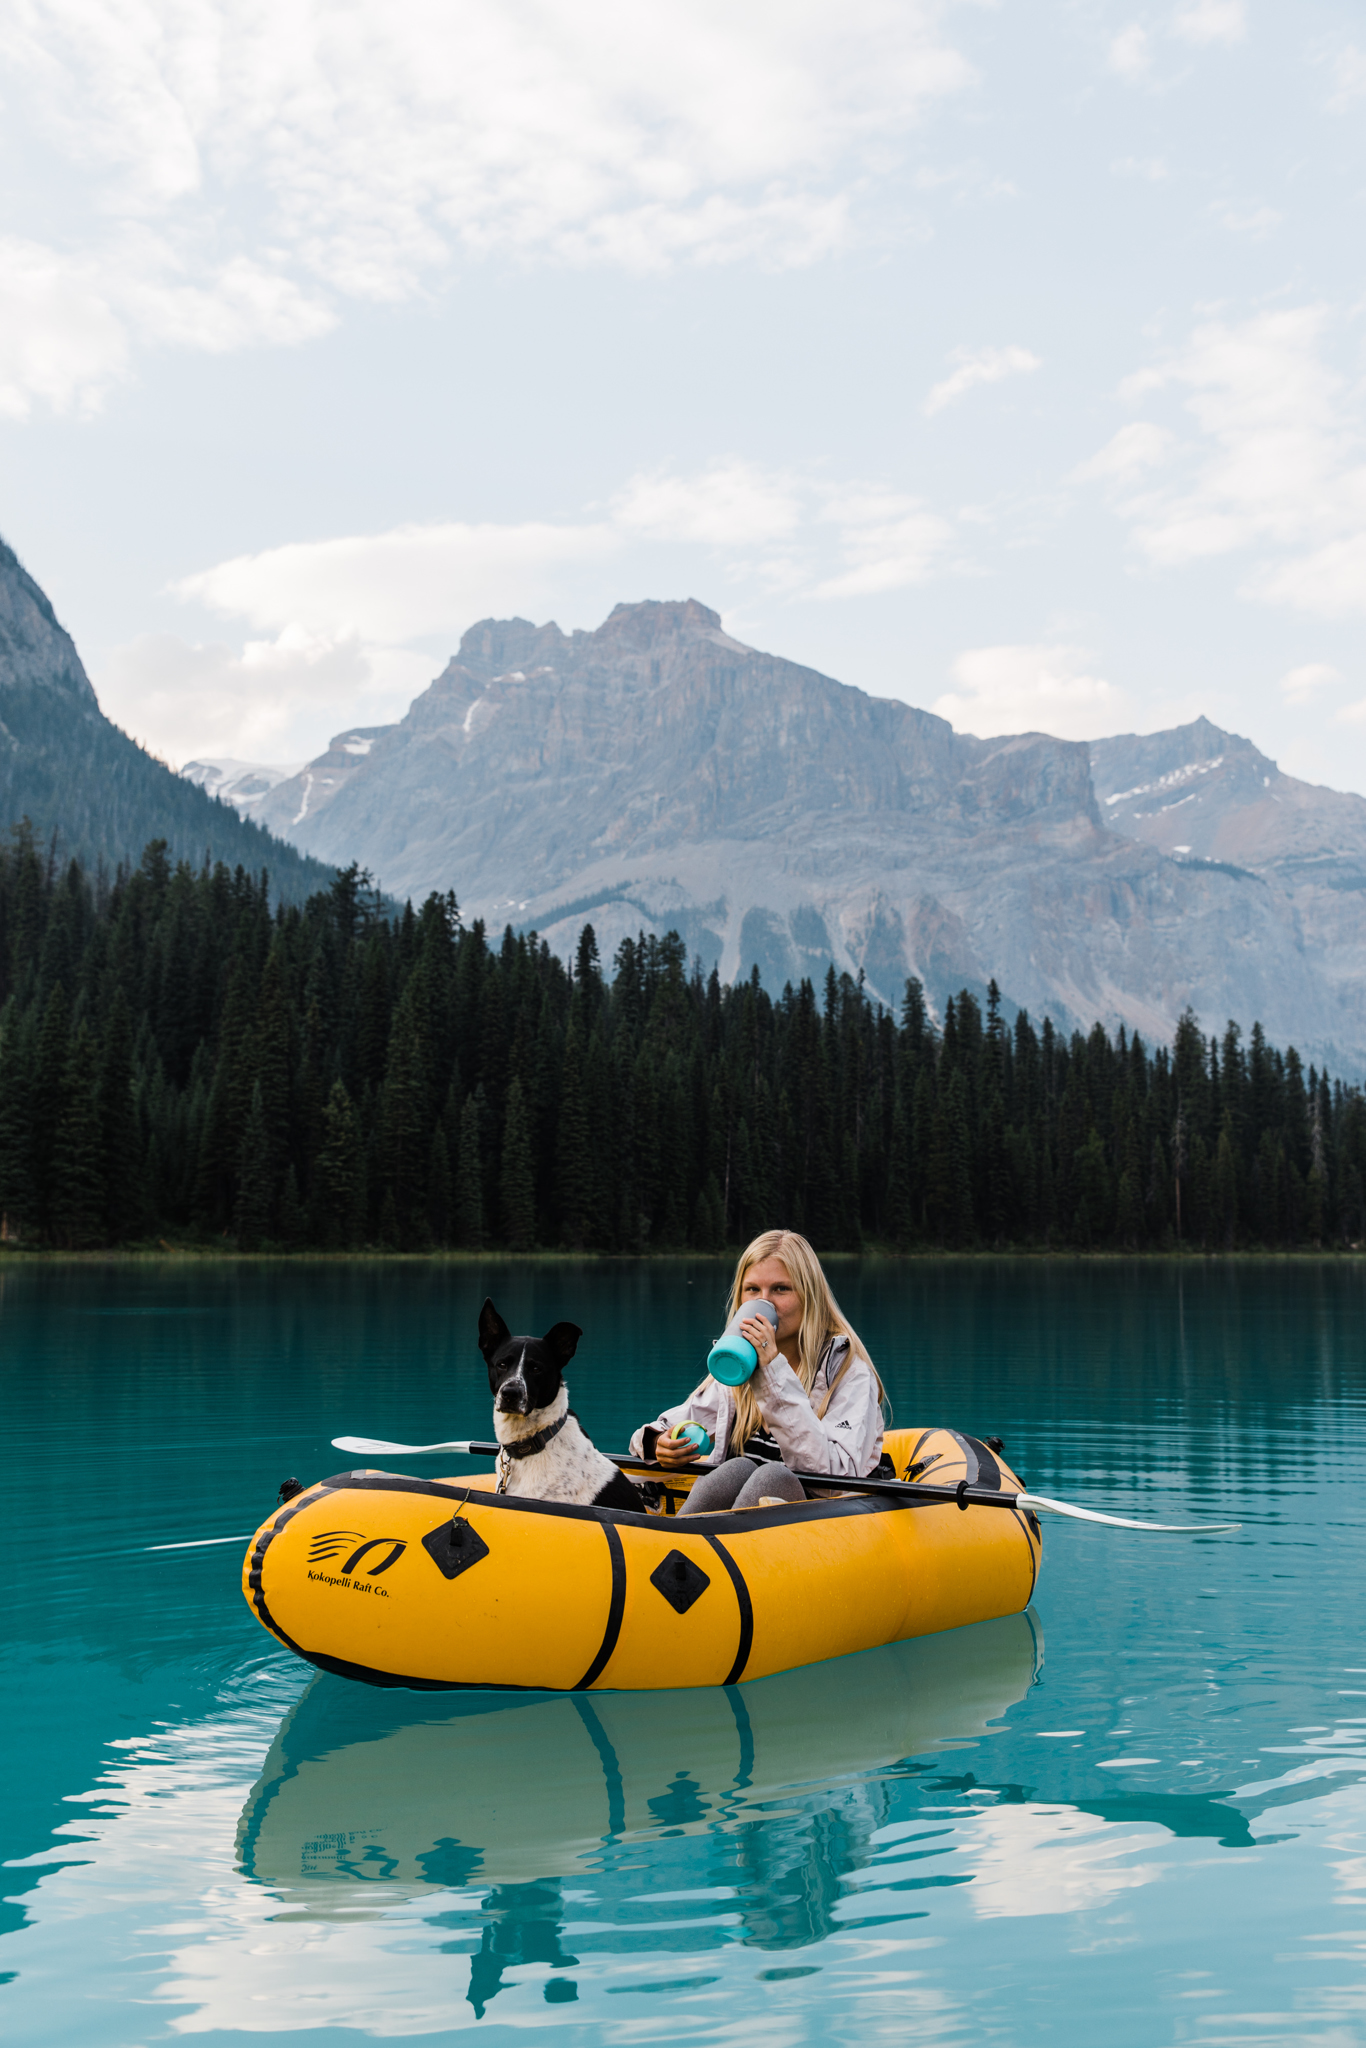 pack rafting in canada | utah and california adventure elopement photographers | the hearnes adventure photography | www.thehearnes.com